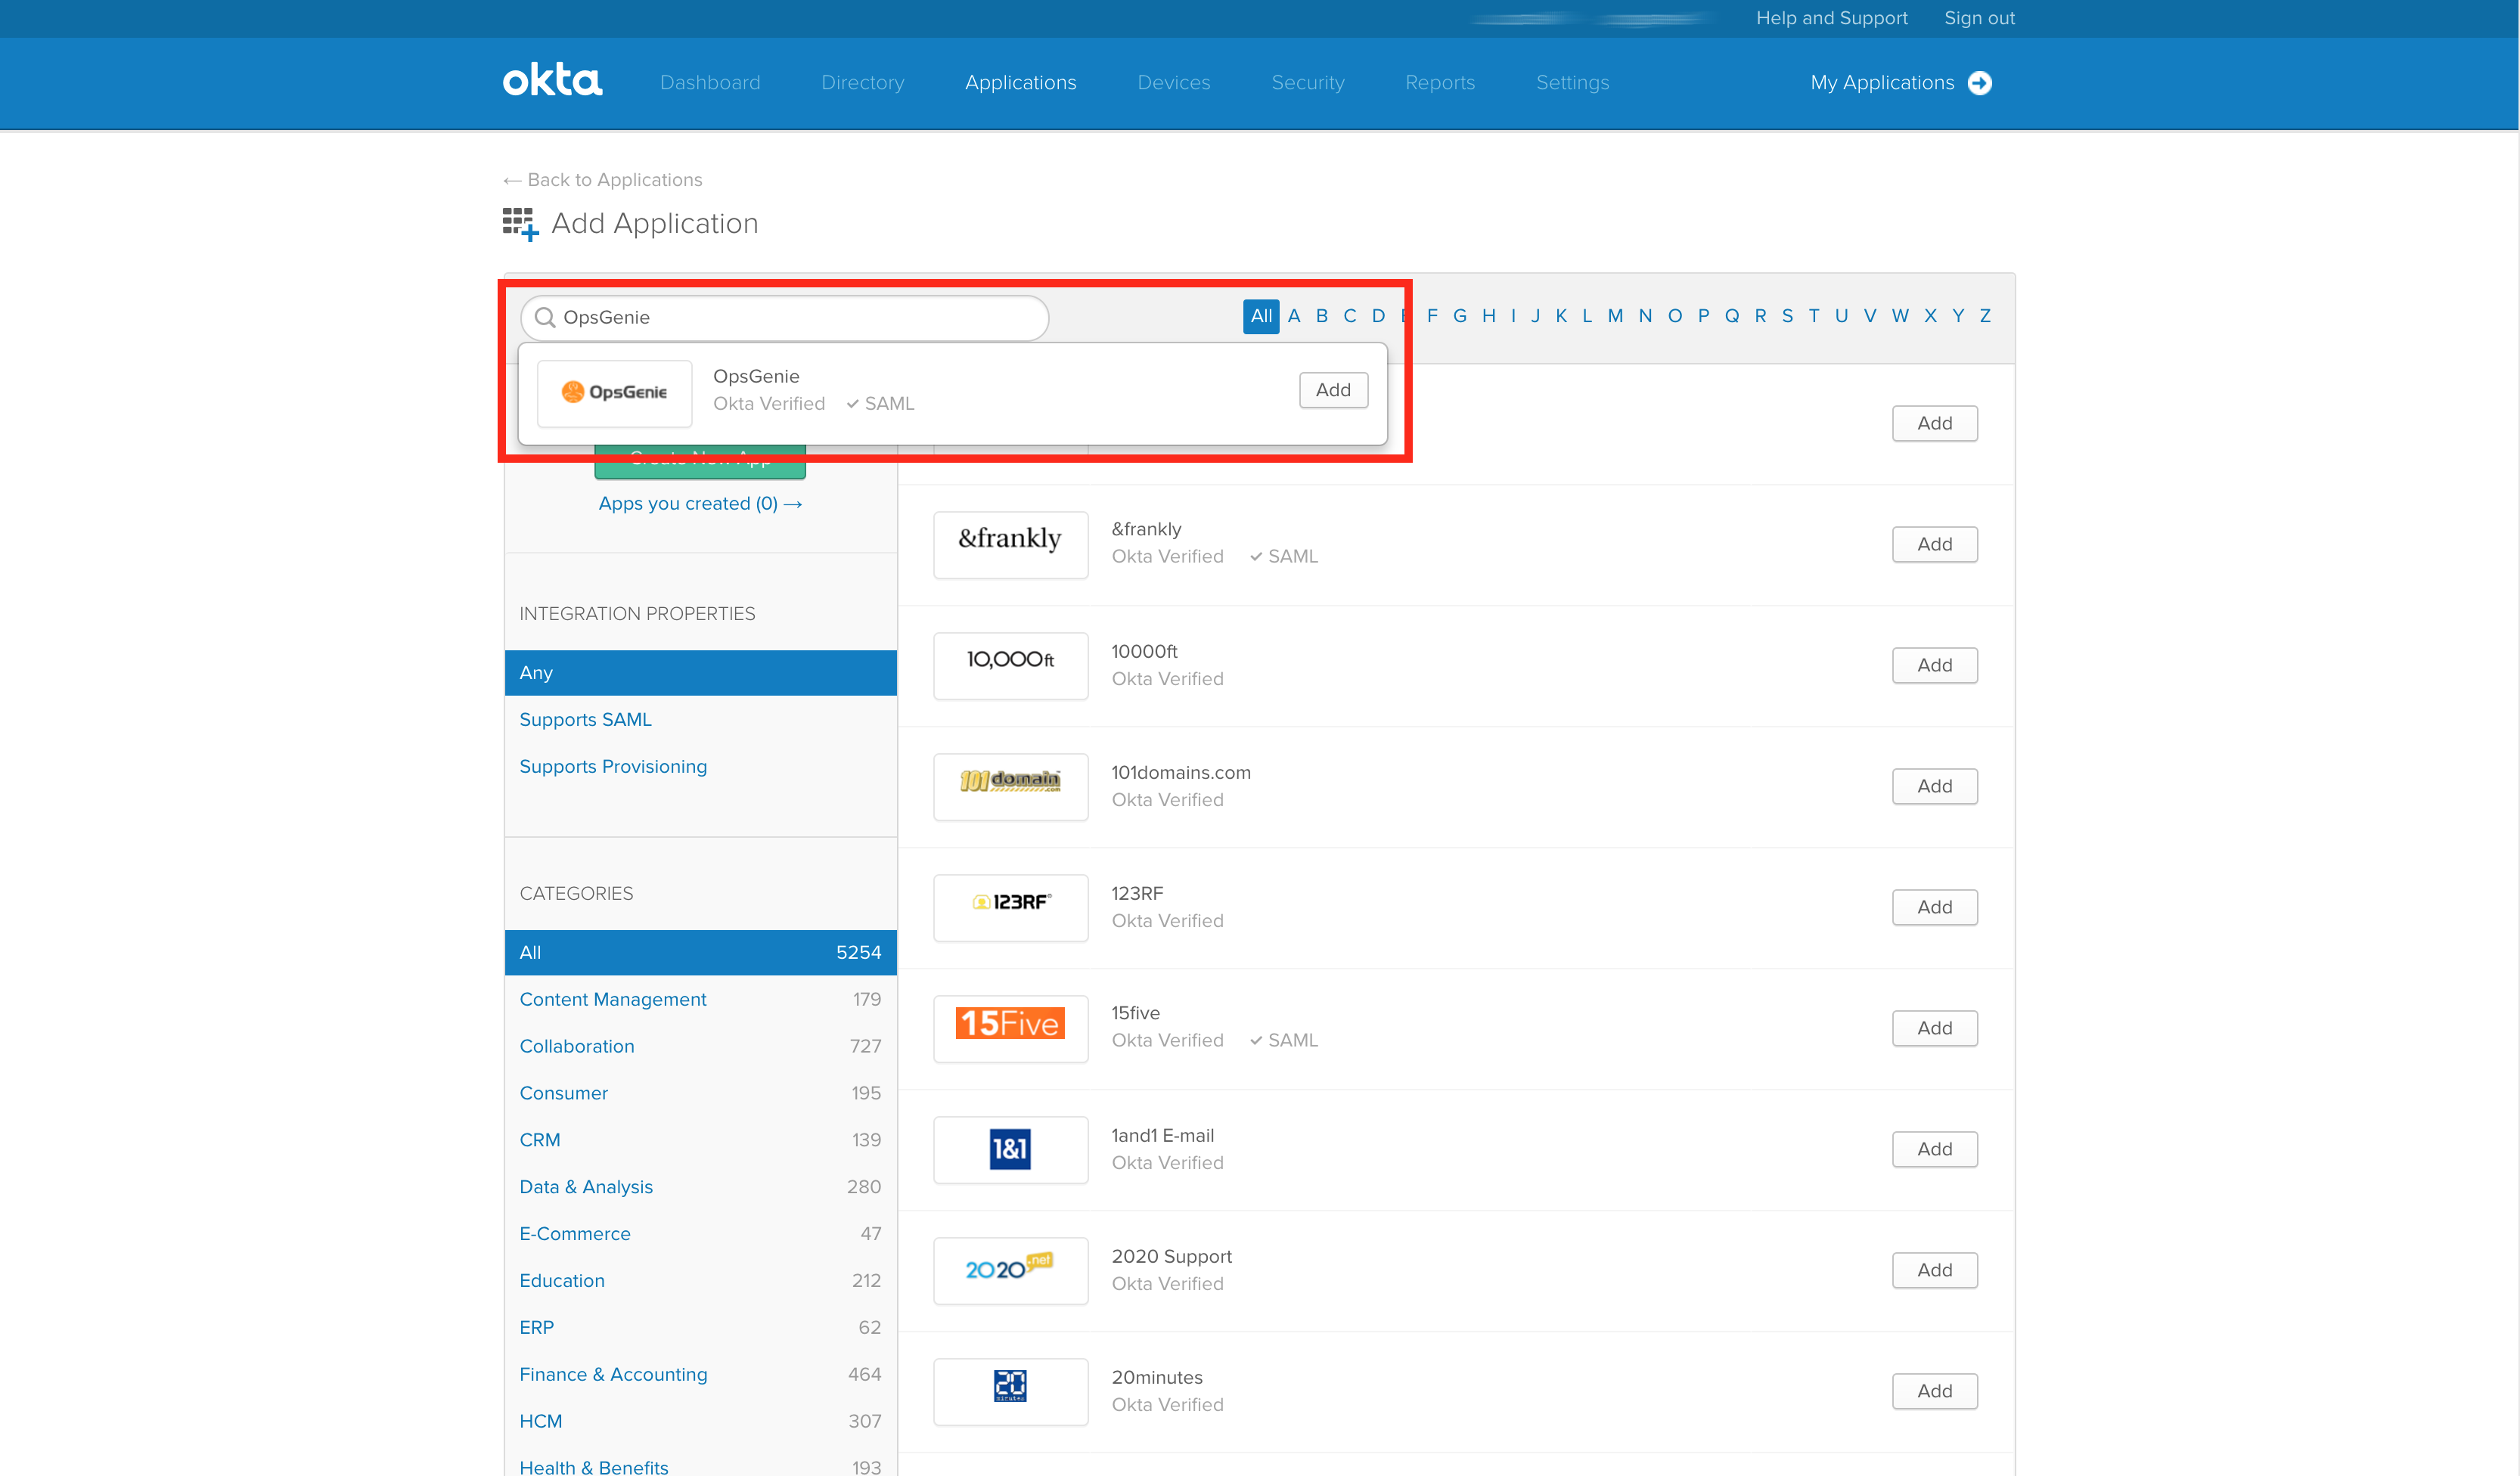 An image showing the Okta search bar.